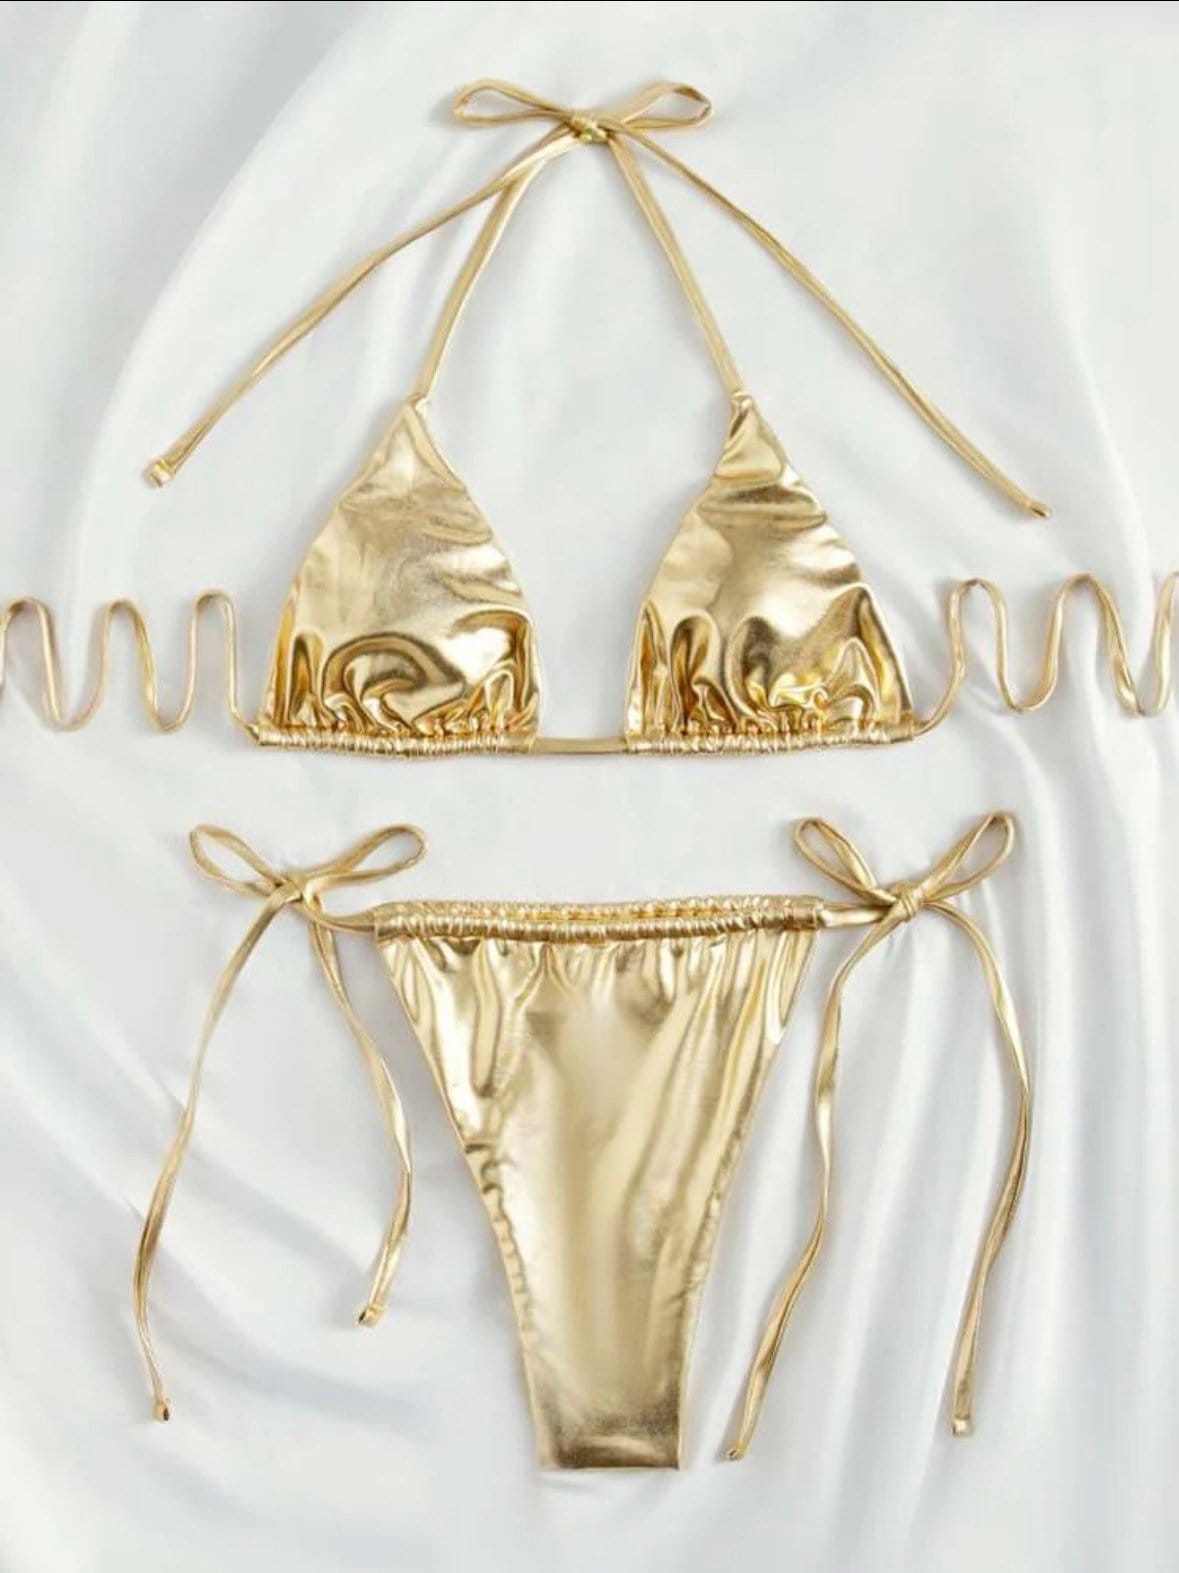 The Metallic gold swim bikini with tie sides and solid metallic gold print triangle halter top tie and bottoms swimsuit set